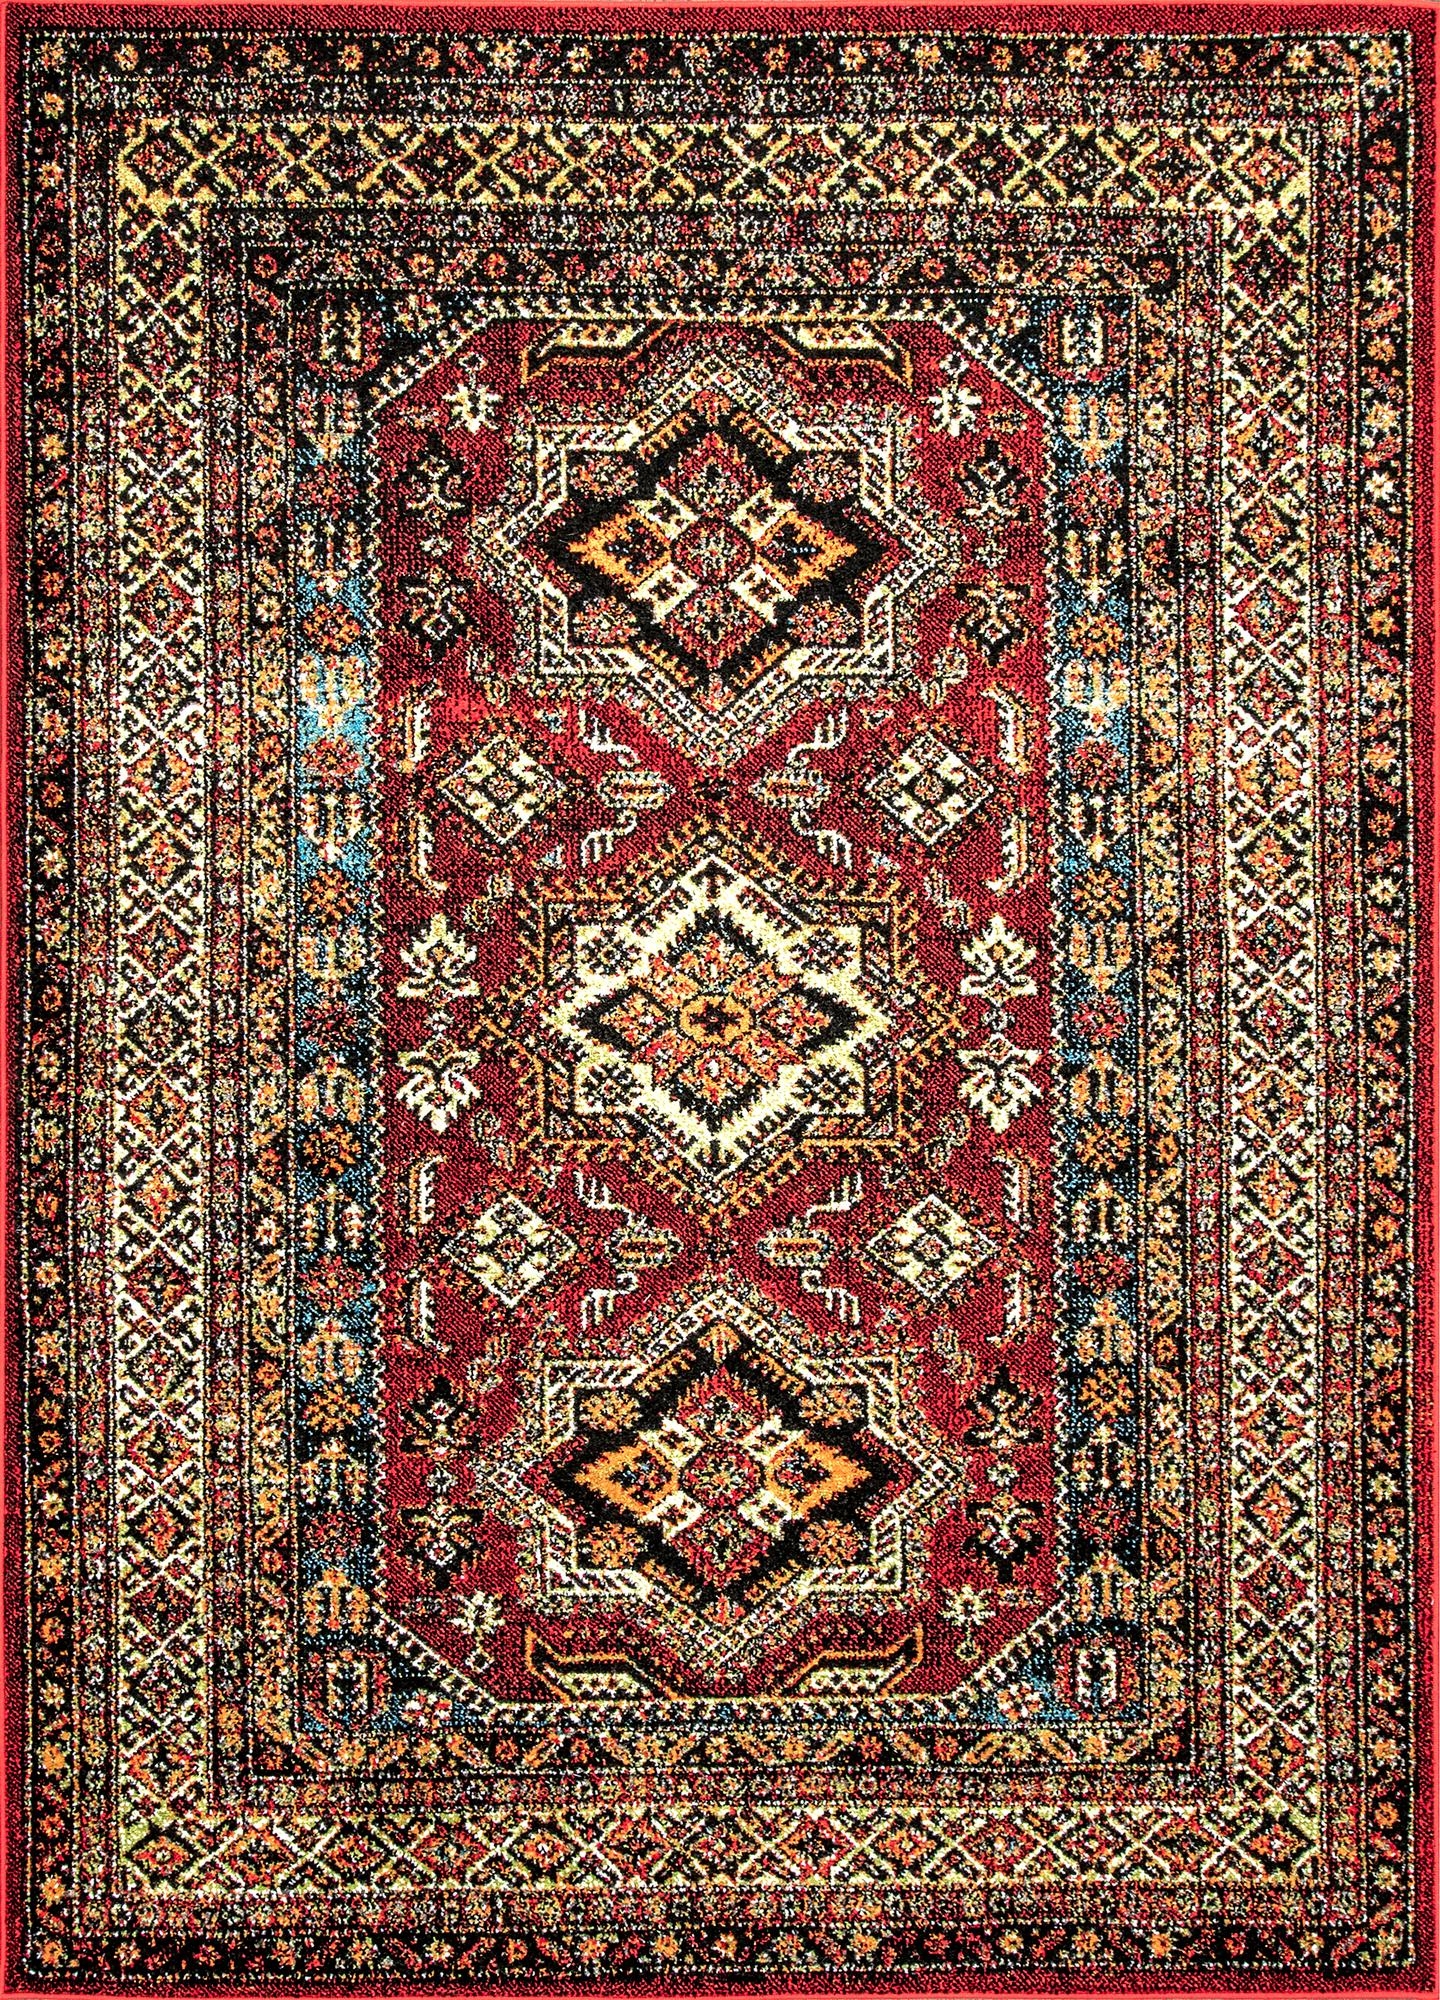  Indoor/Outdoor Transitional Medieval Randy Area Rug - Image 1